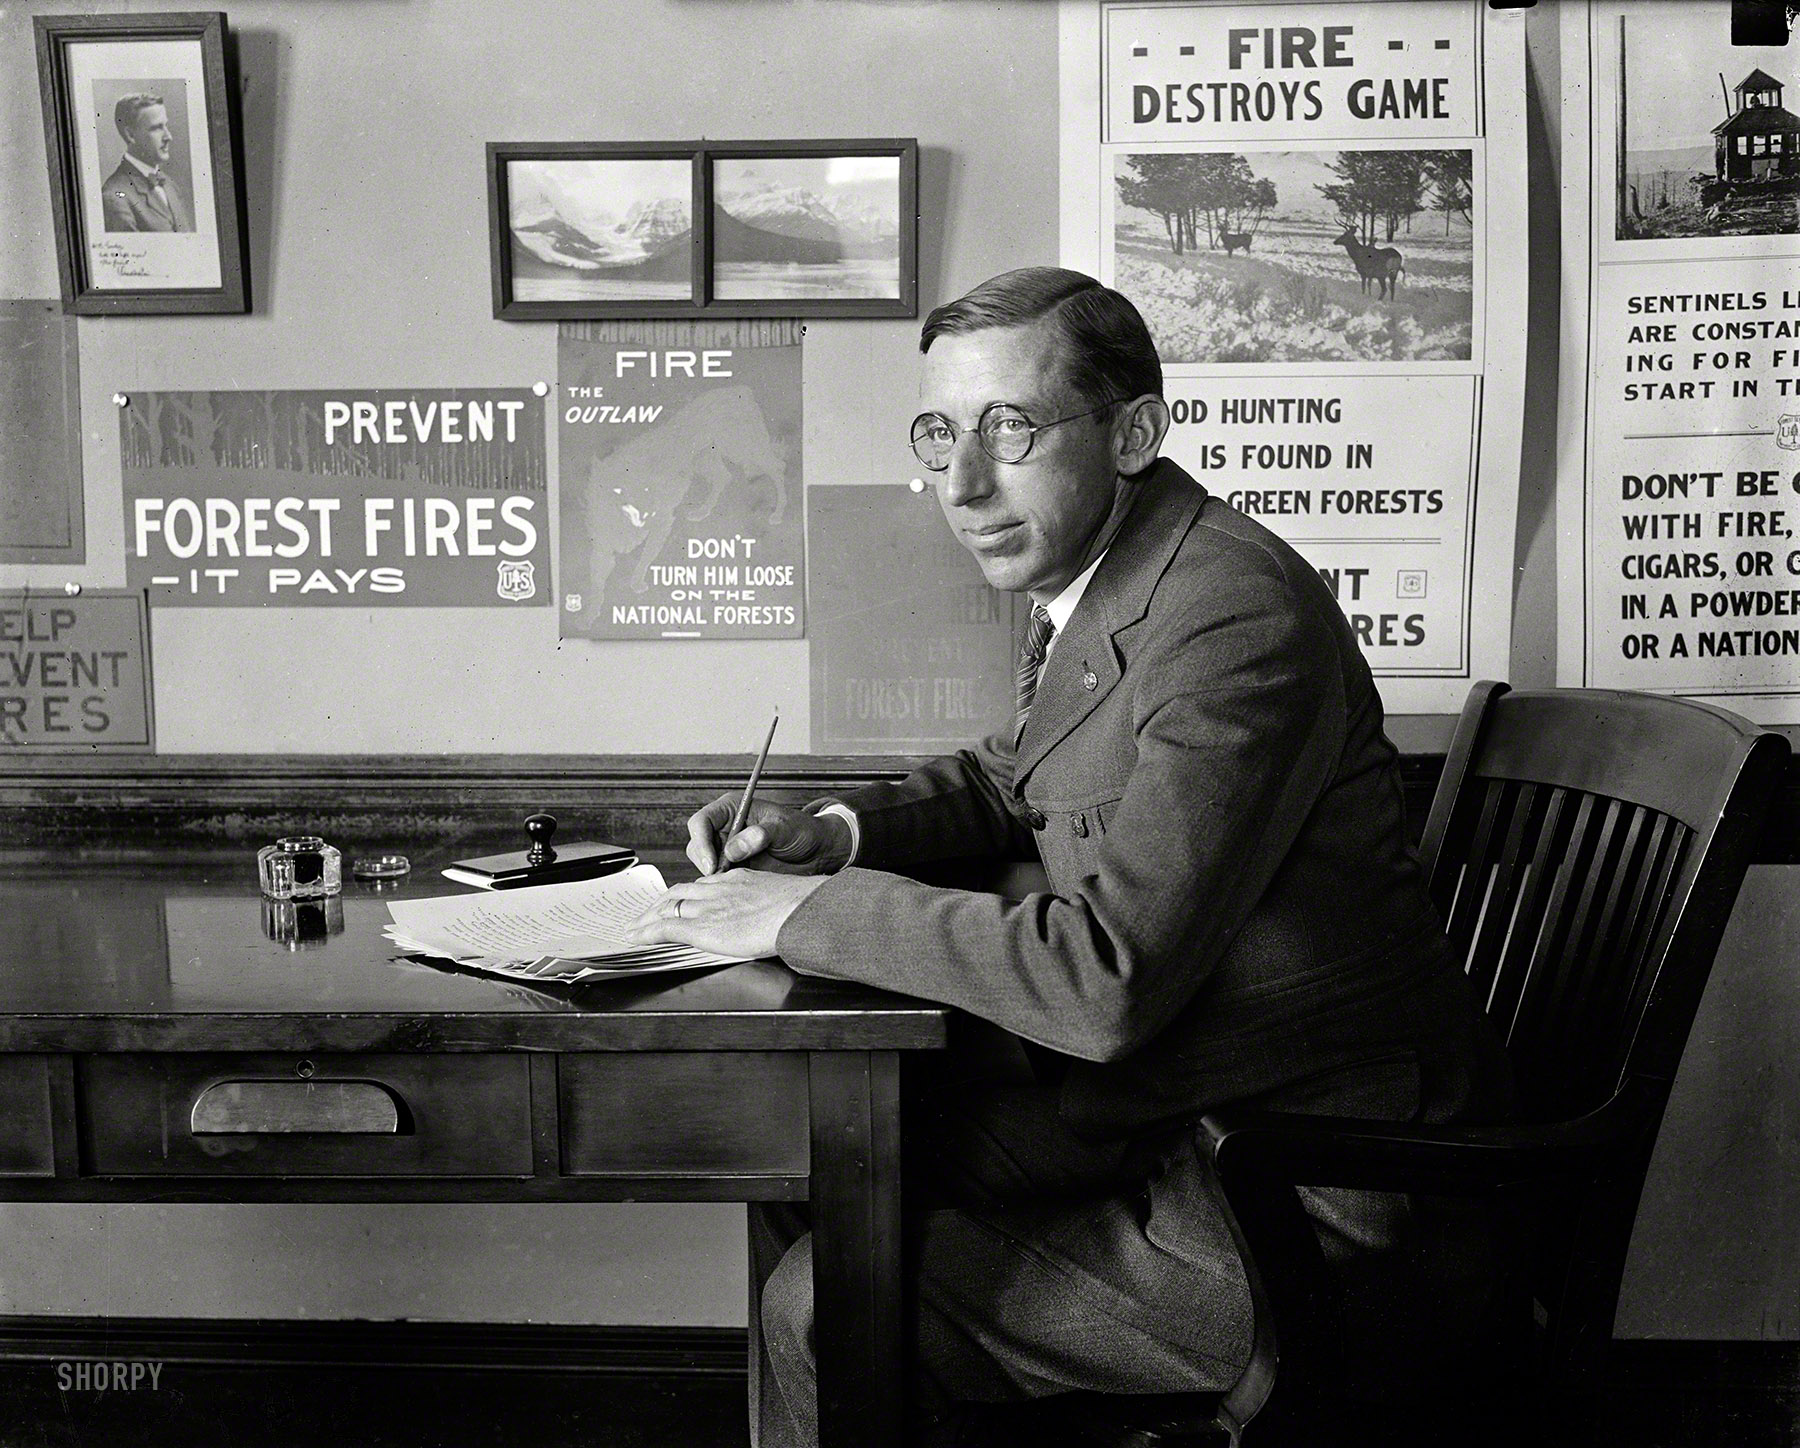 April 1923. Washington, D.C. Another unlabeled Harris & Ewing plate, showing someone we imagine to be the bureaucrat tasked with kindling fire-prevention slogans. Say, does it seem a little smokey in here? View full size.